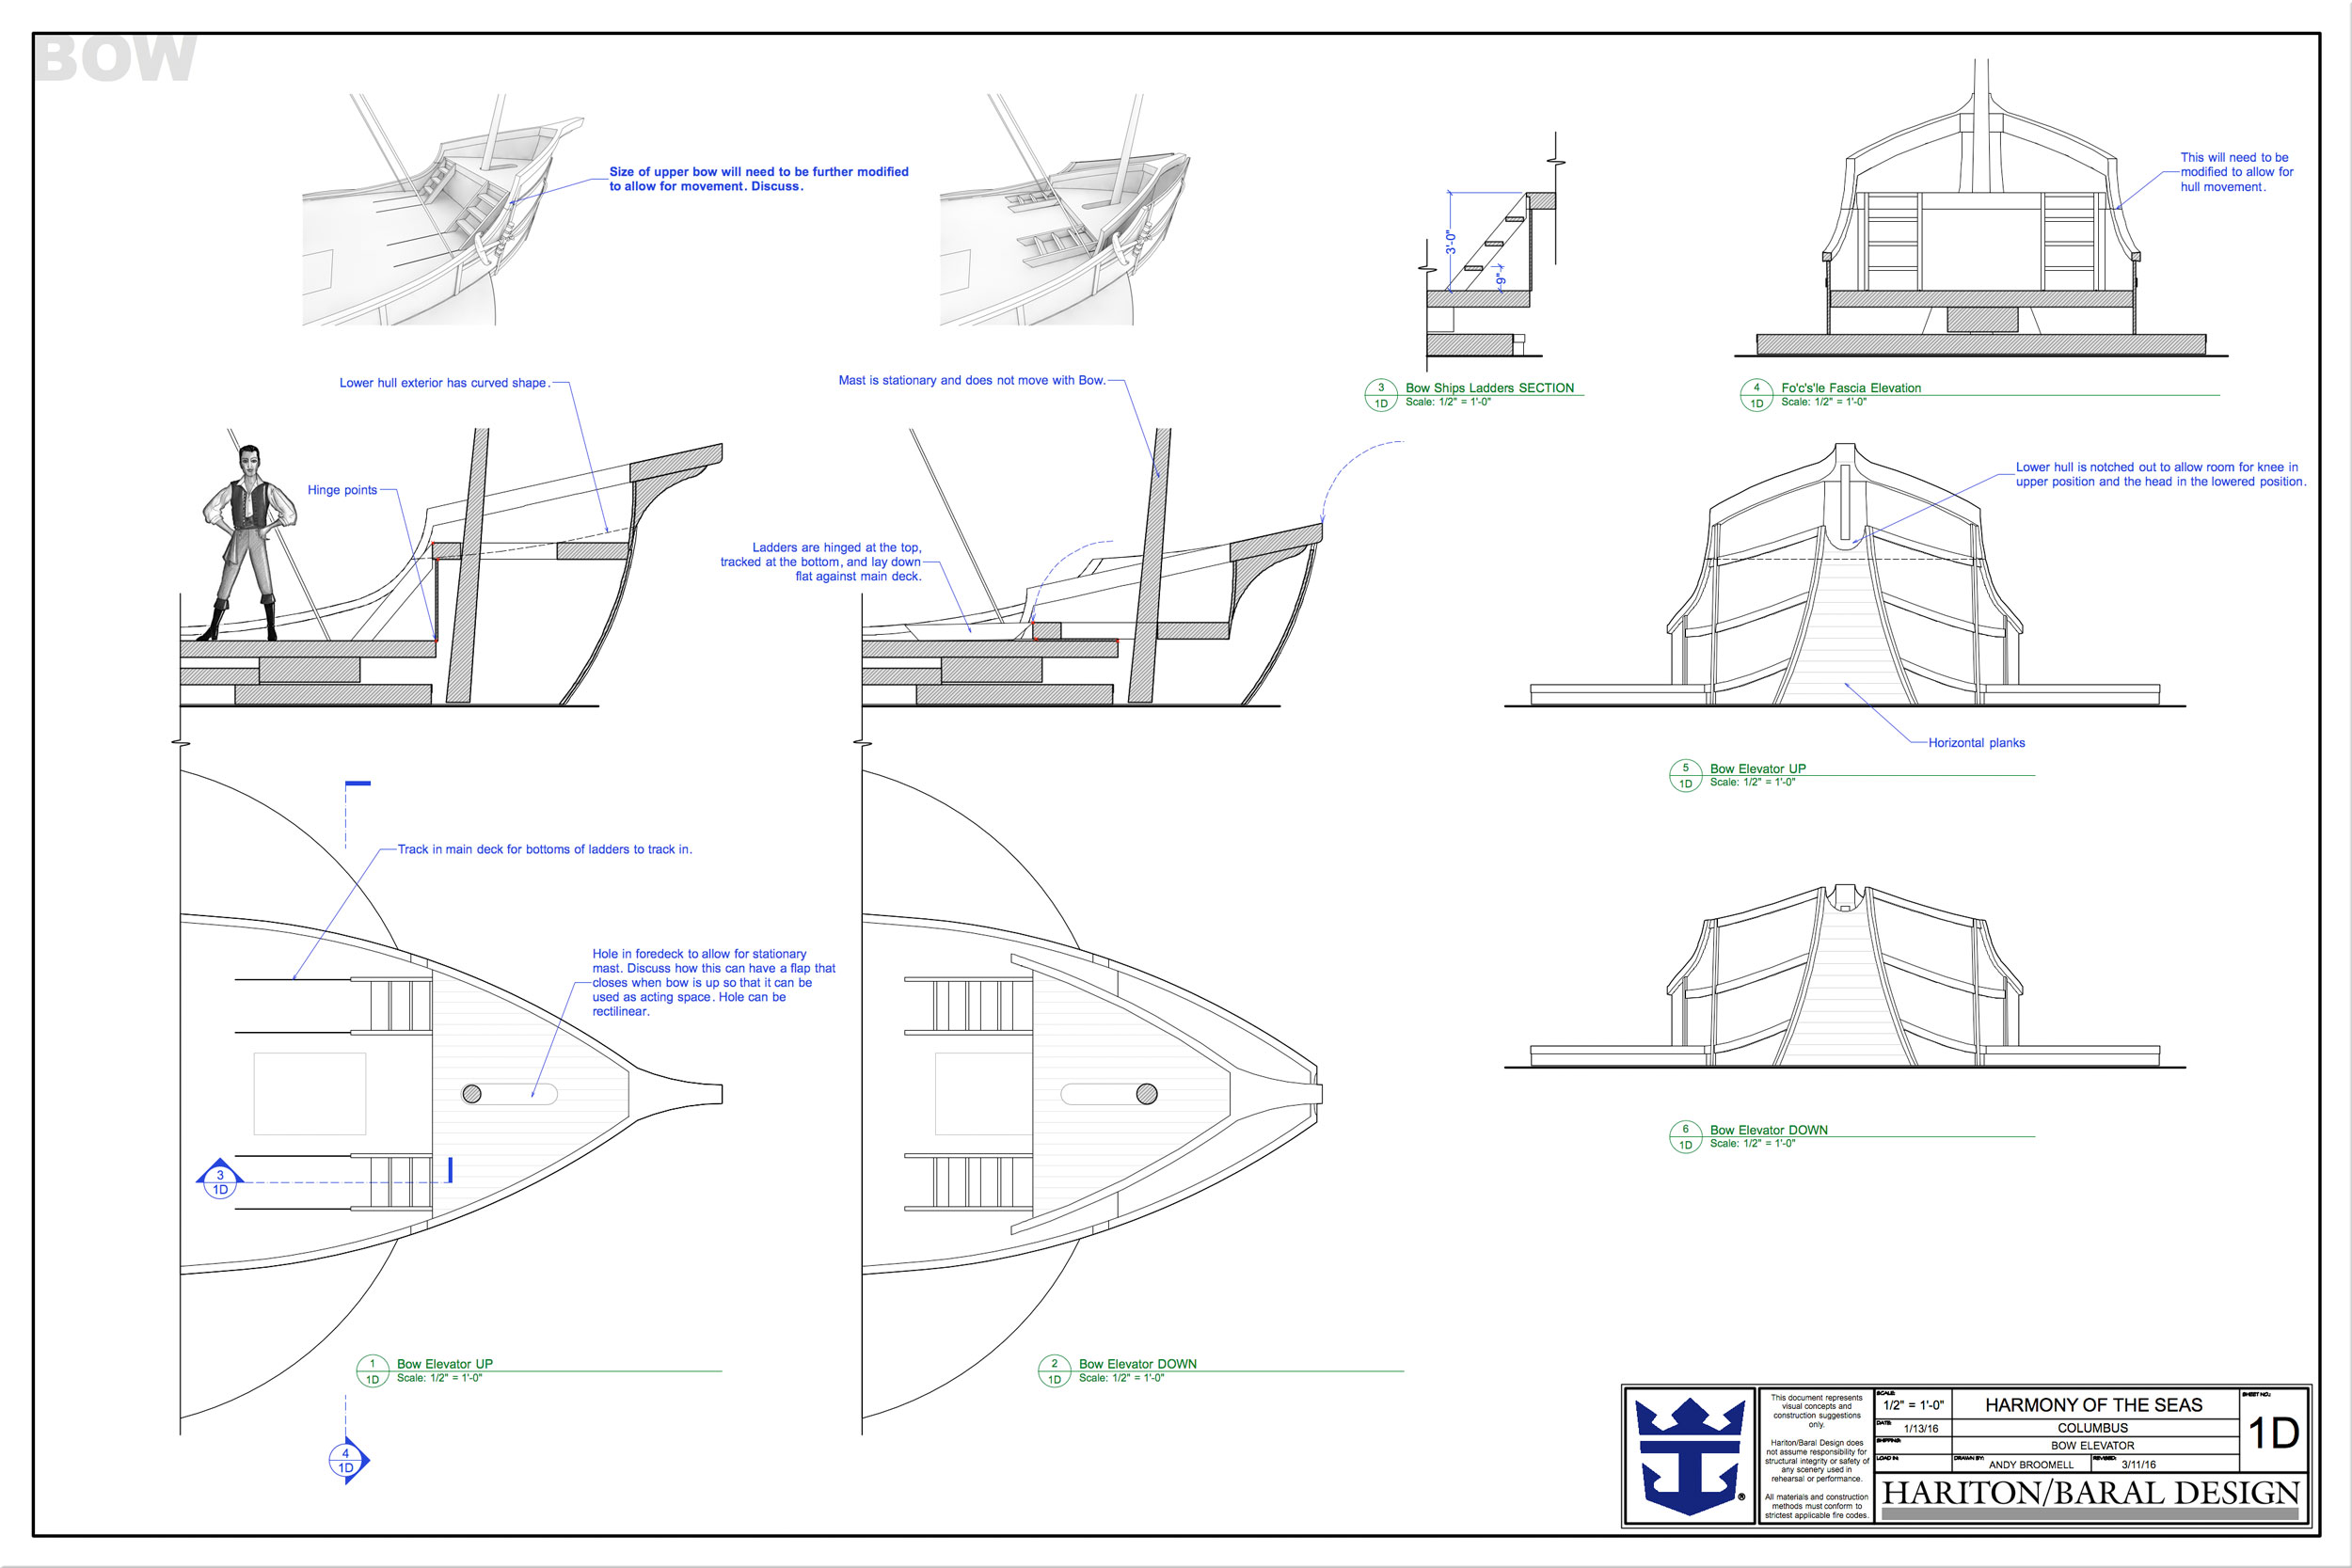 andy-broomell-drafting-columbus4-musical-vectorworks-scenic-design-scenery-plans-sailing-ship.jpg